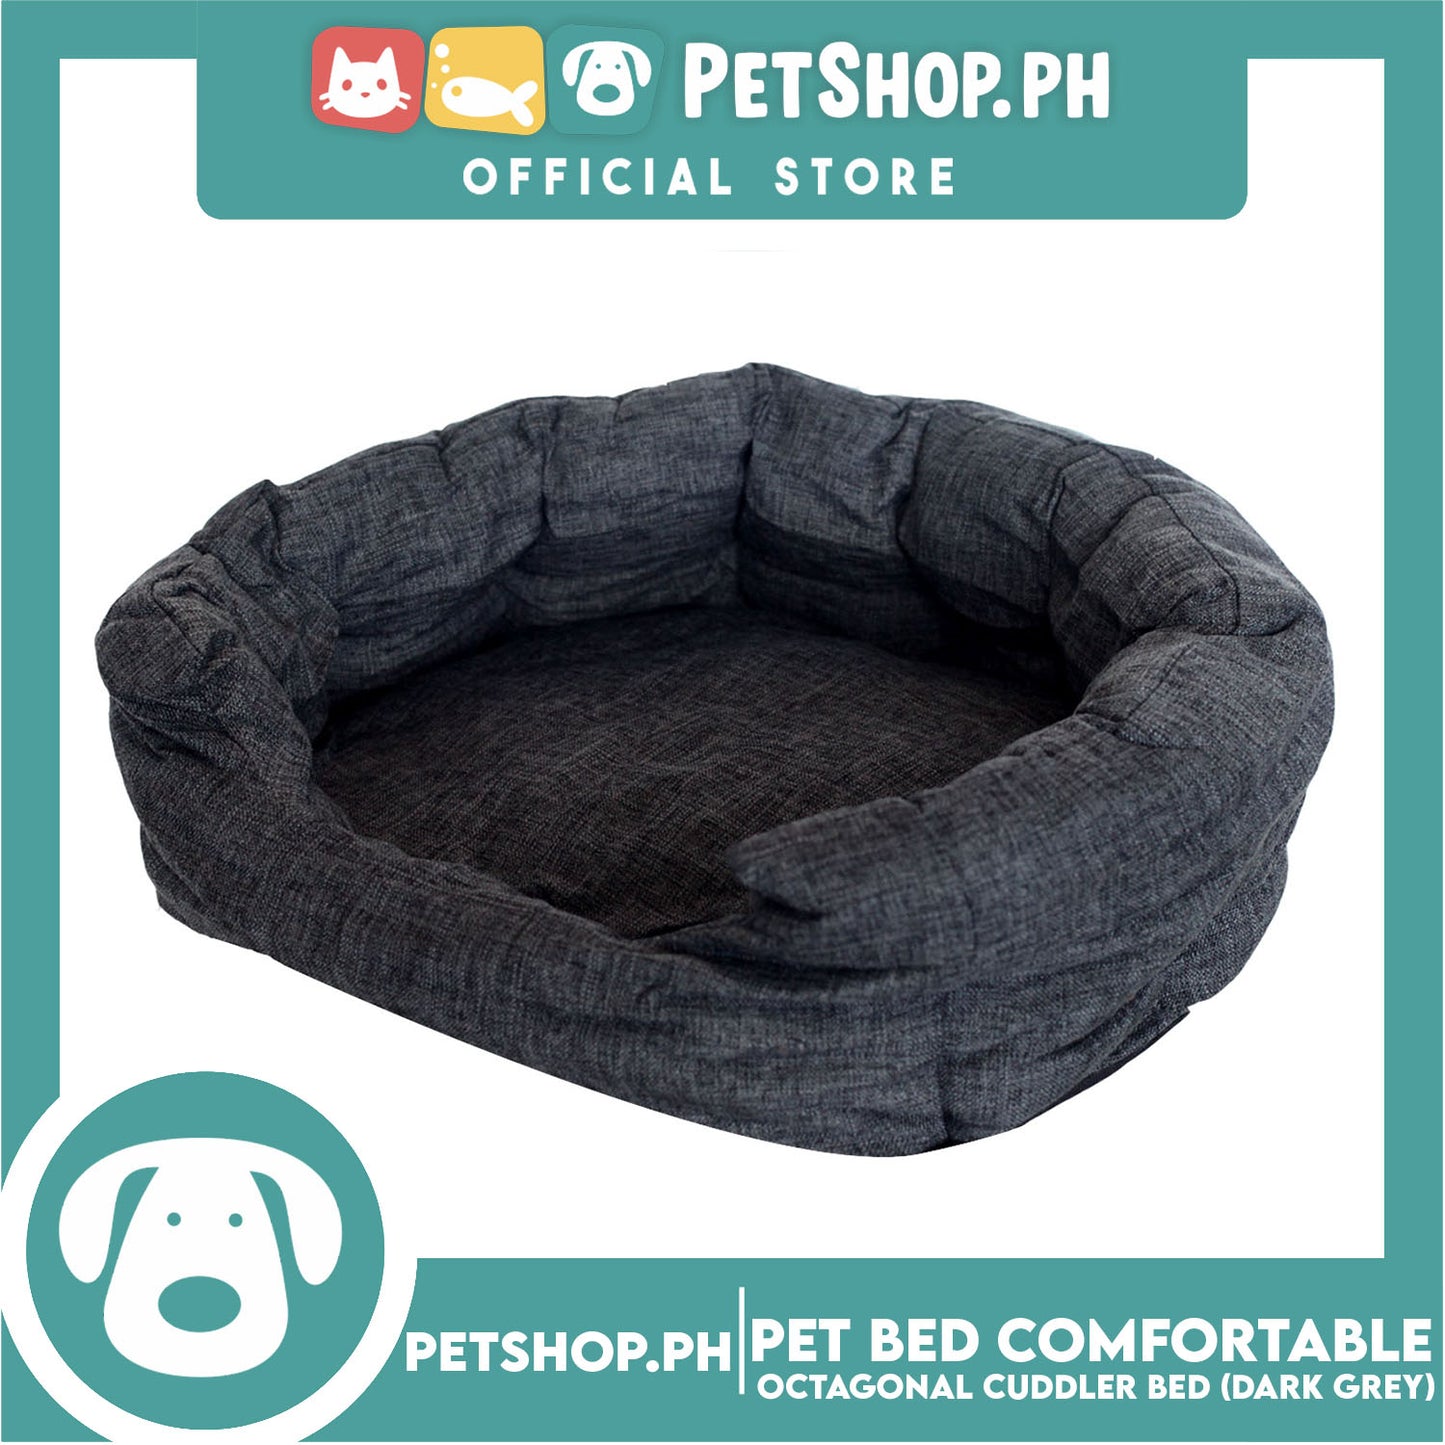 Pet Bed Comfortable Octagonal Cuddler Dog Bed 42x35x13cm Small for Dogs & Cats (Dark Gray)